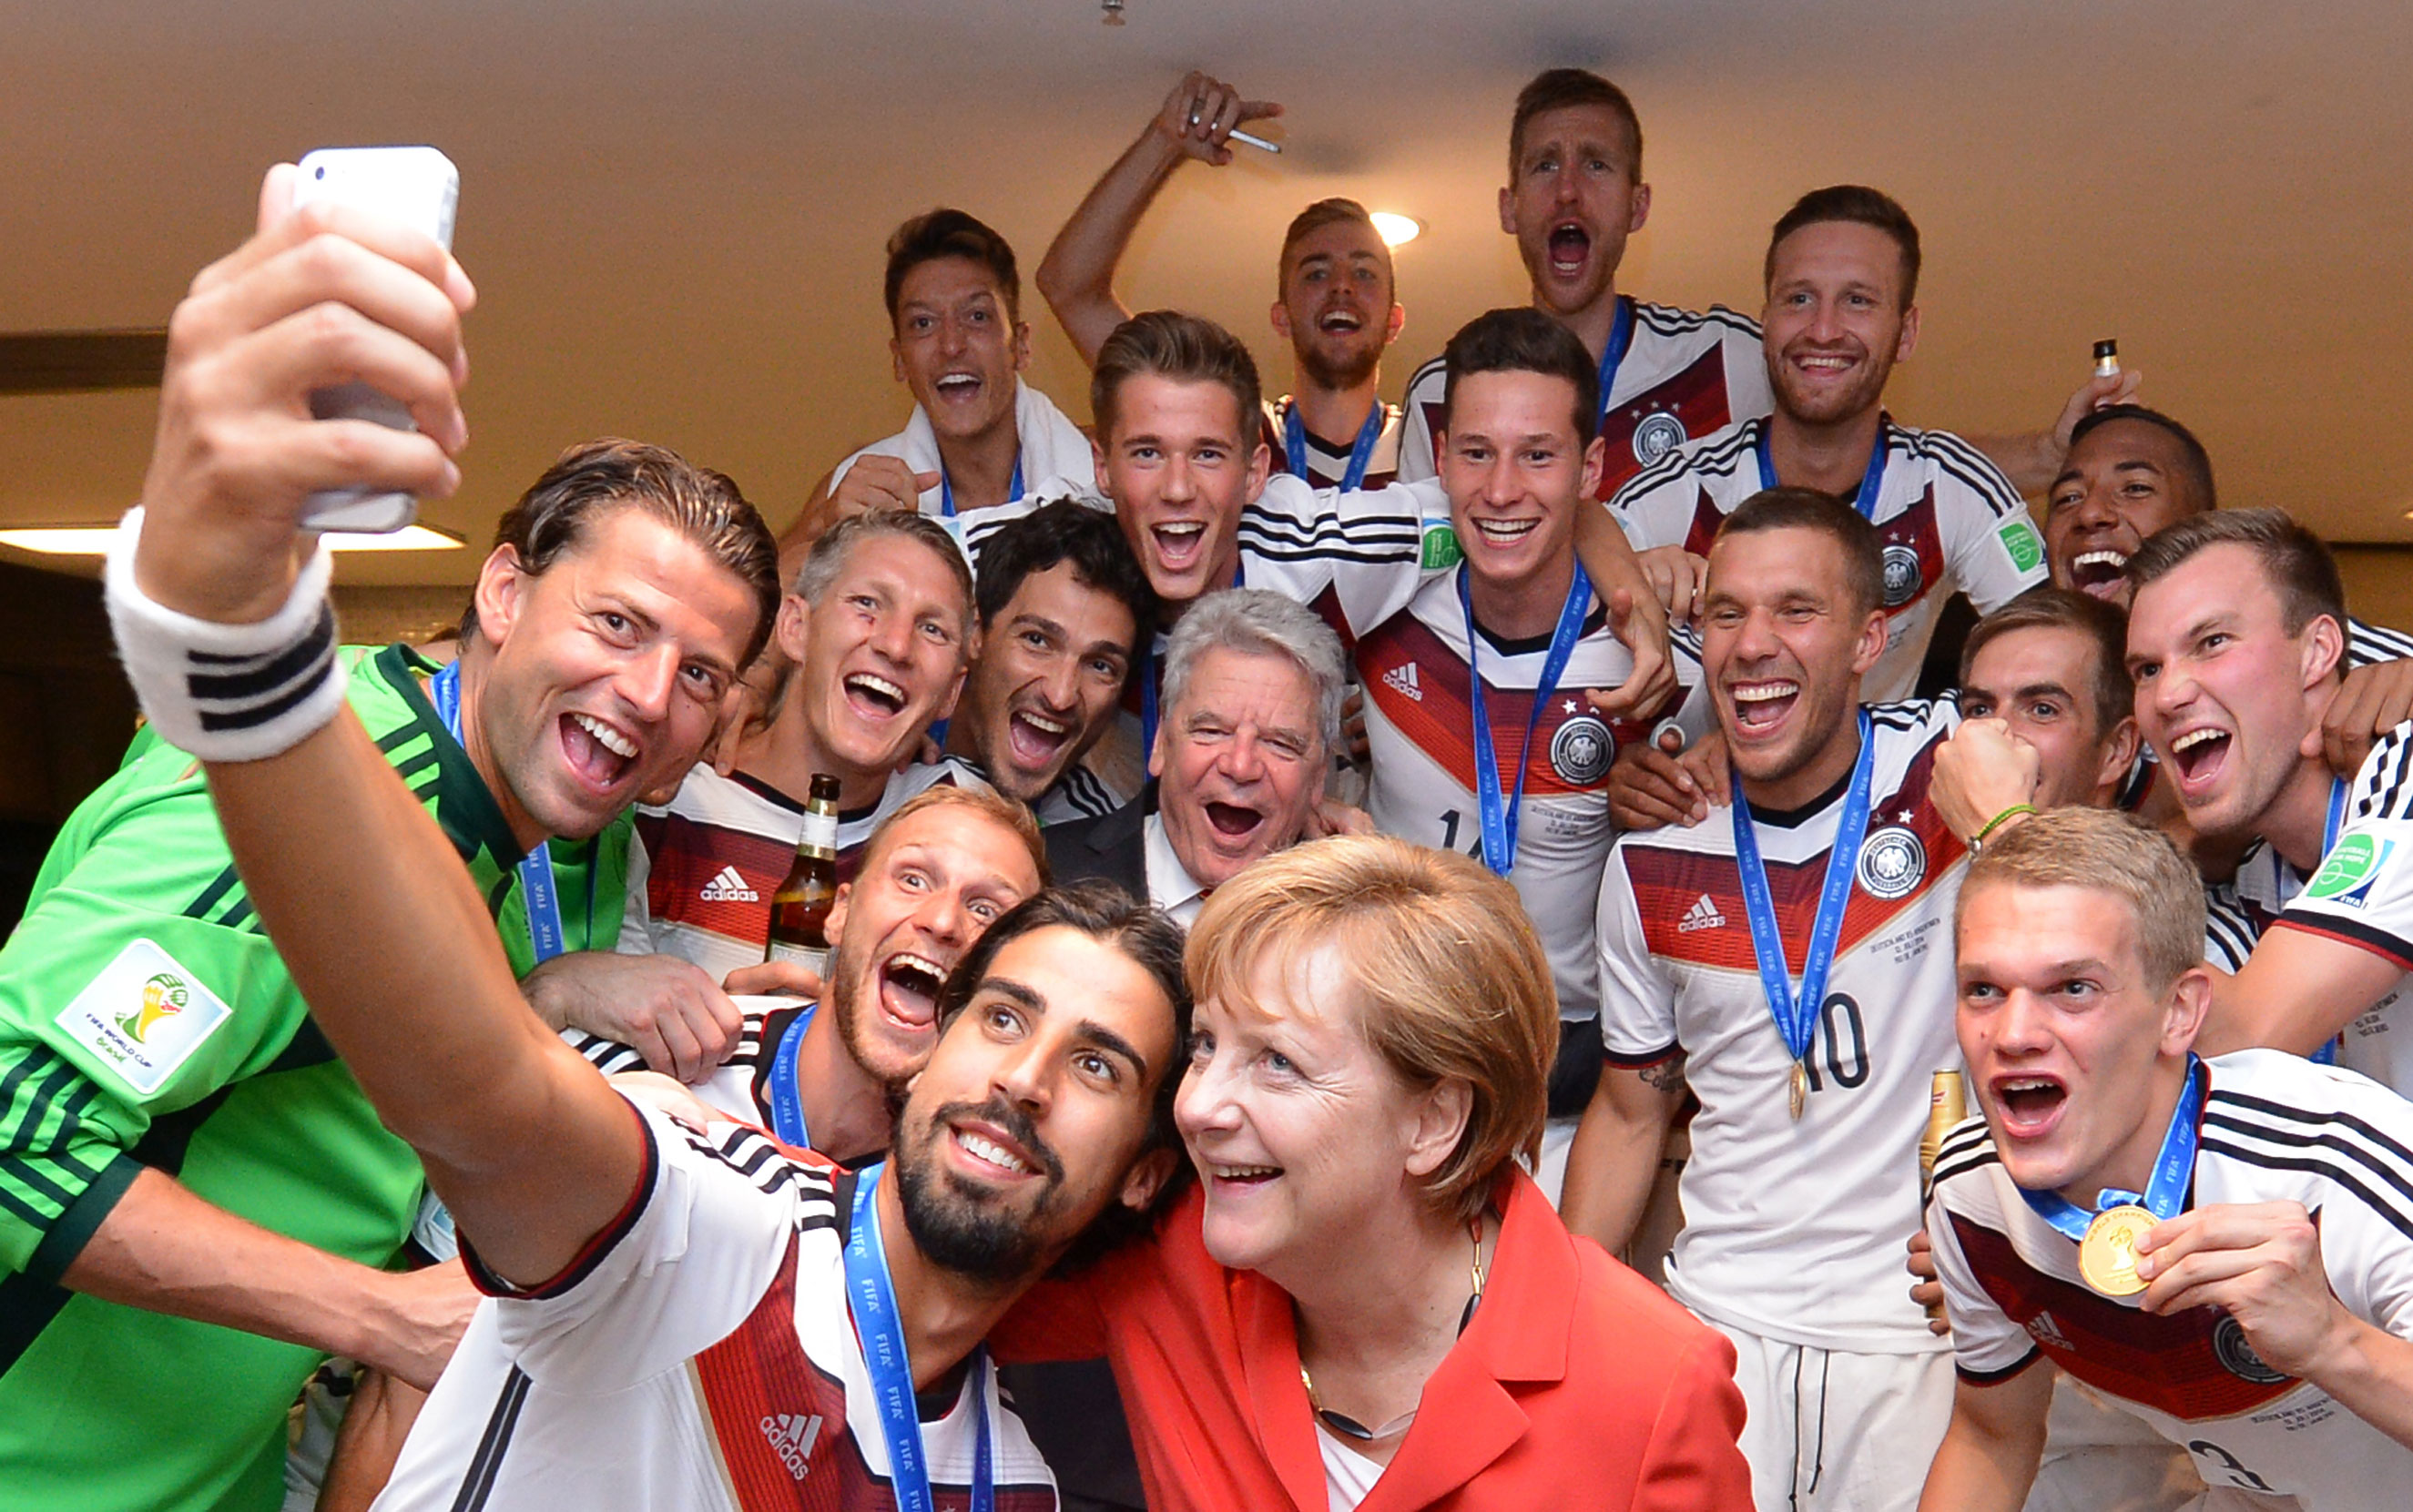 Chancellor Angela Merkel and German President Joachim Gauck celebrate with the players in the Germany dressing room after the 2014 FIFA World Cup Brazil Final match between Germany and Argentina at Maracana on July 13, 2014 in Rio de Janeiro.